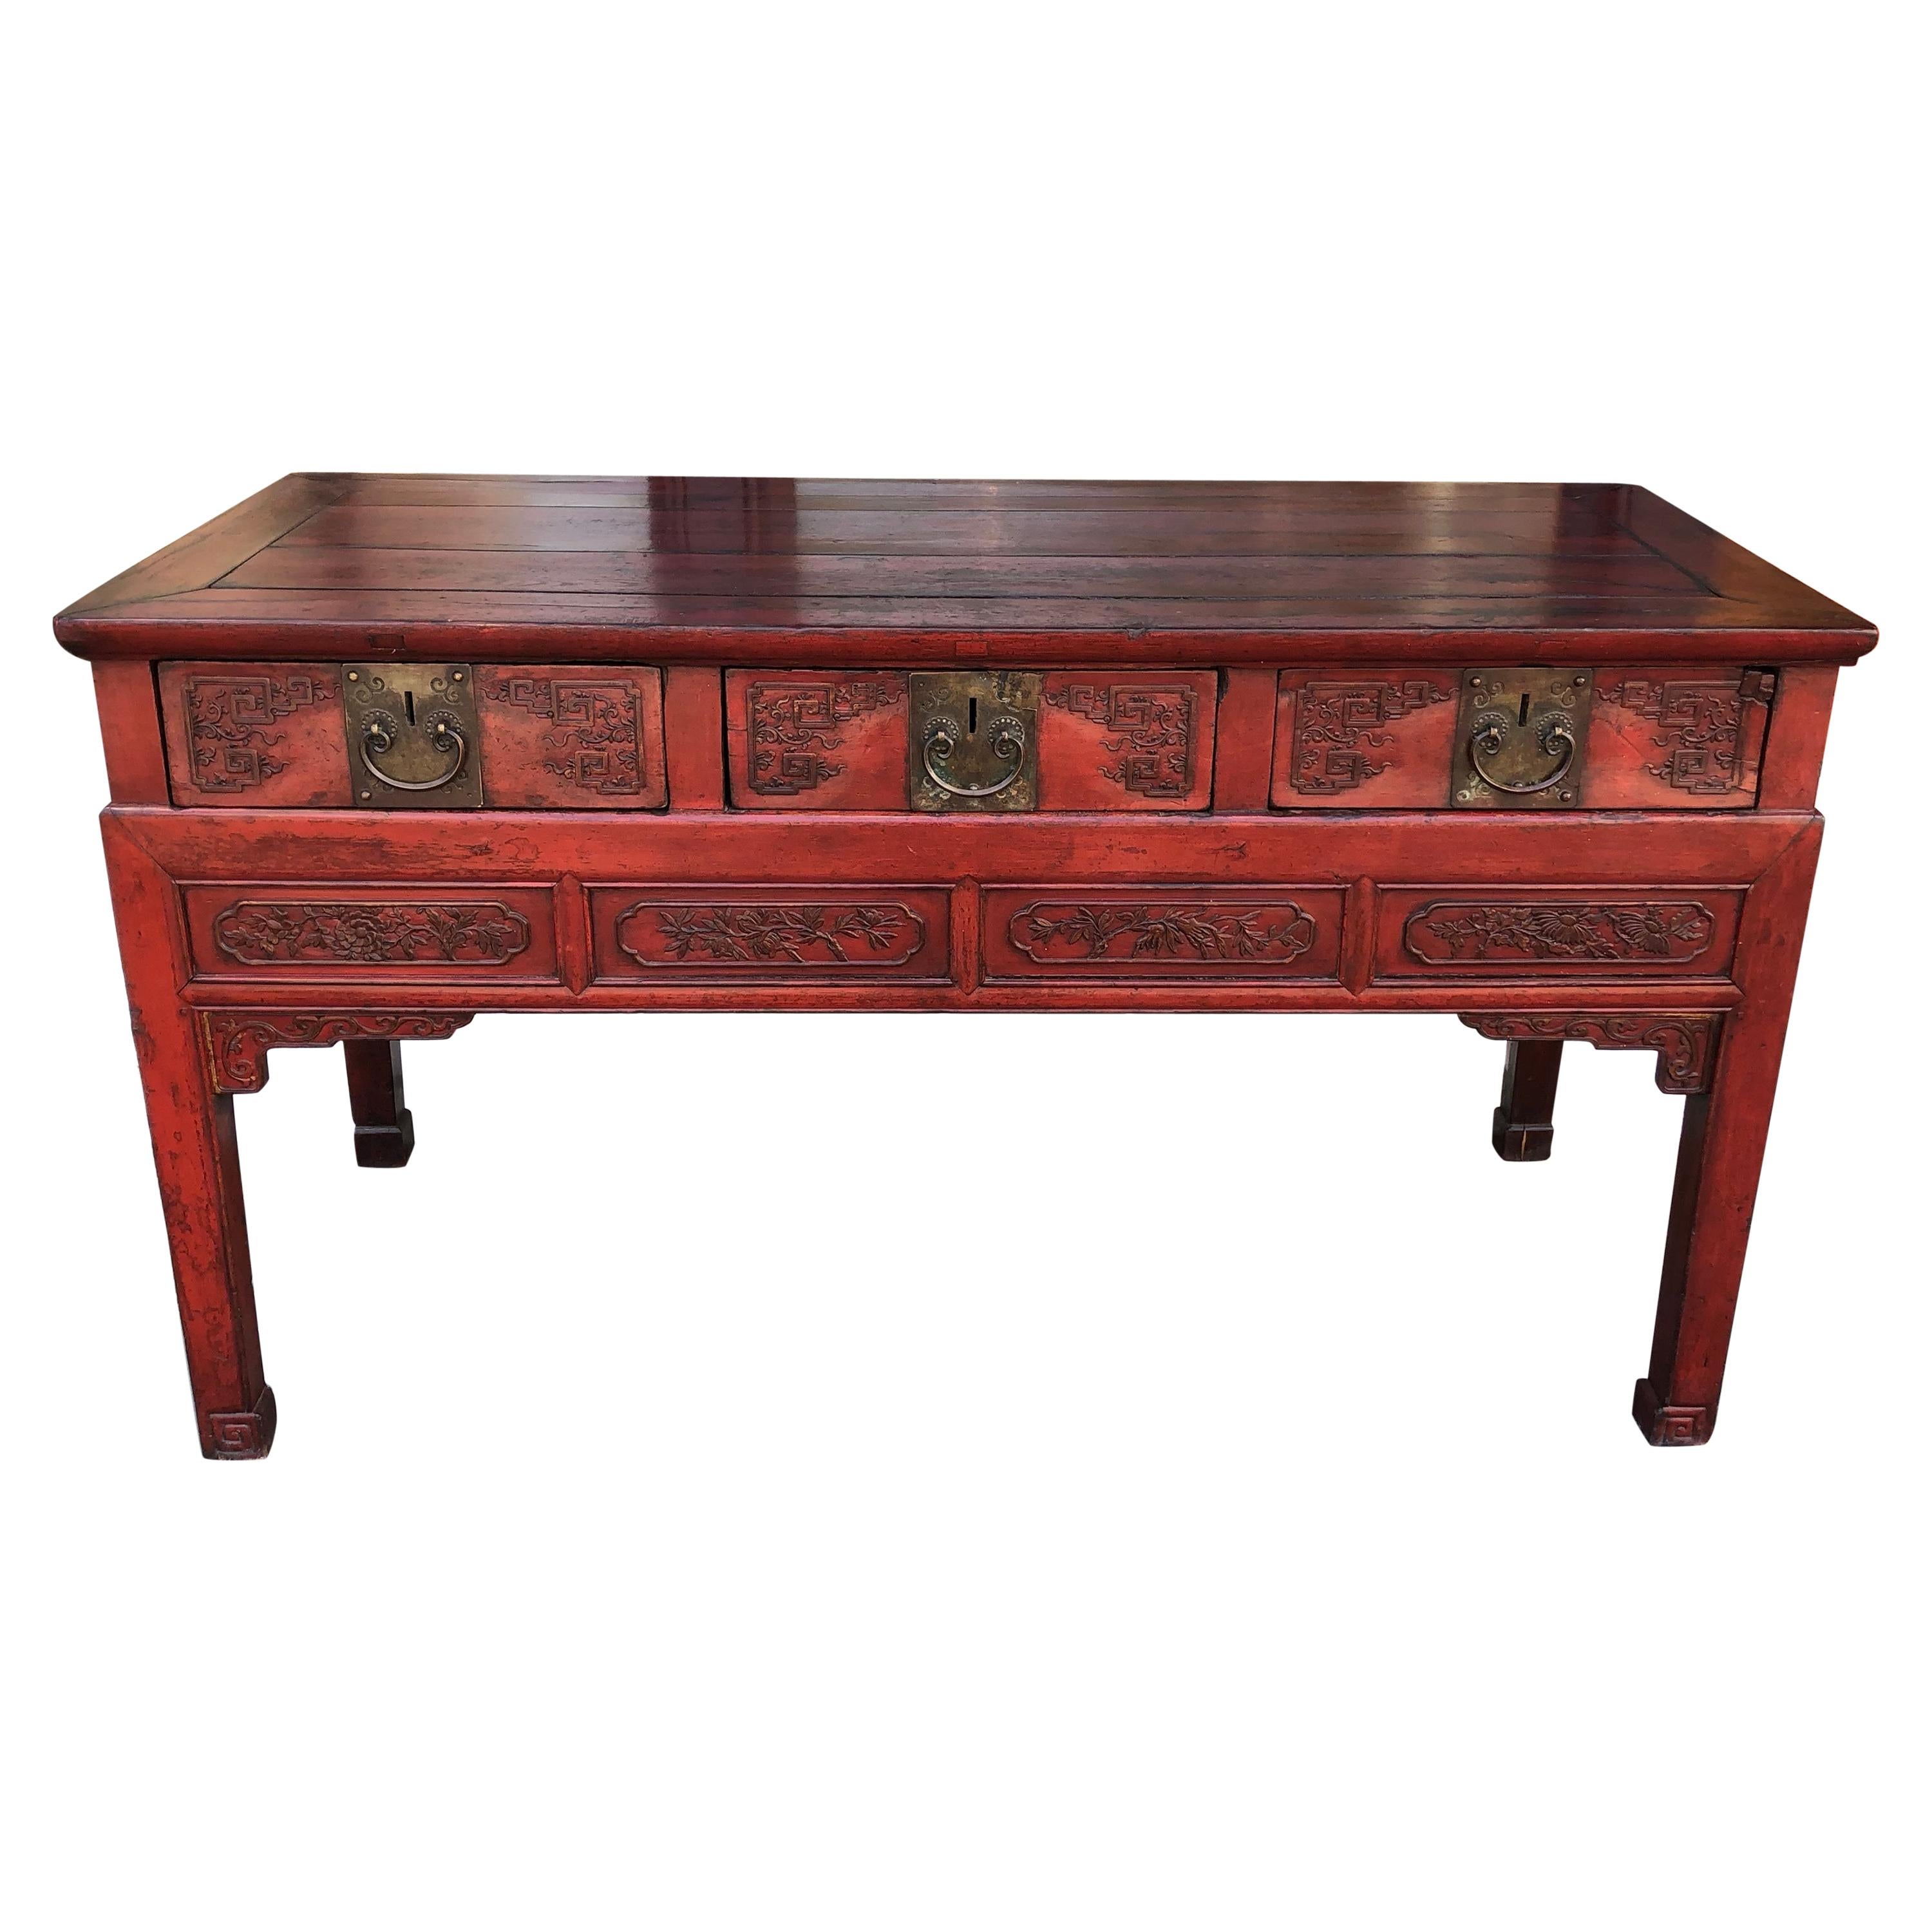 Mid-19th Century Server or Sideboard with 3 Drawers and Carved Details in Drawer For Sale